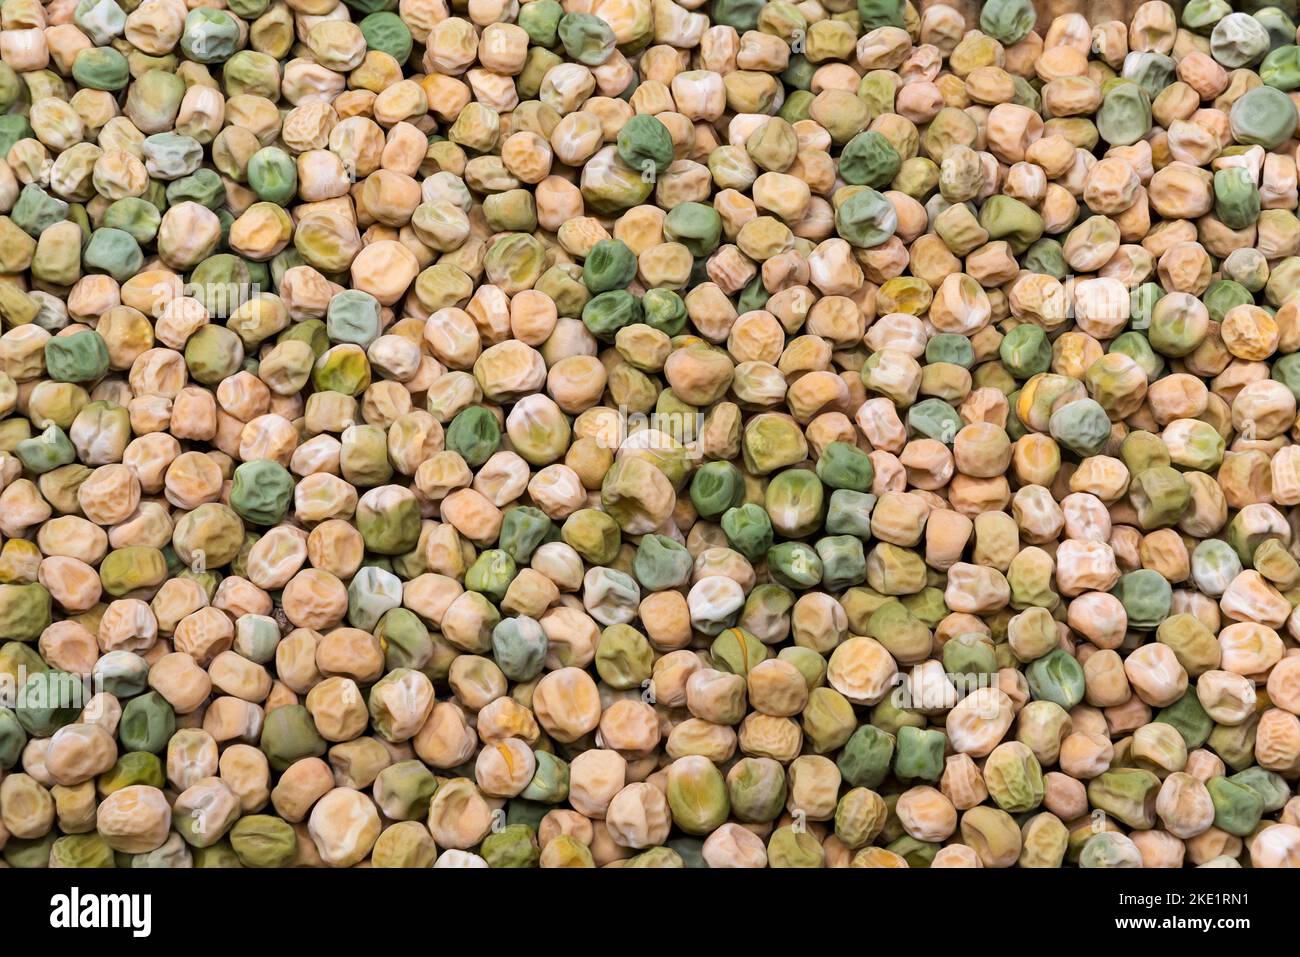 Pea. Dry green peas texture background. Top view. Stock Photo